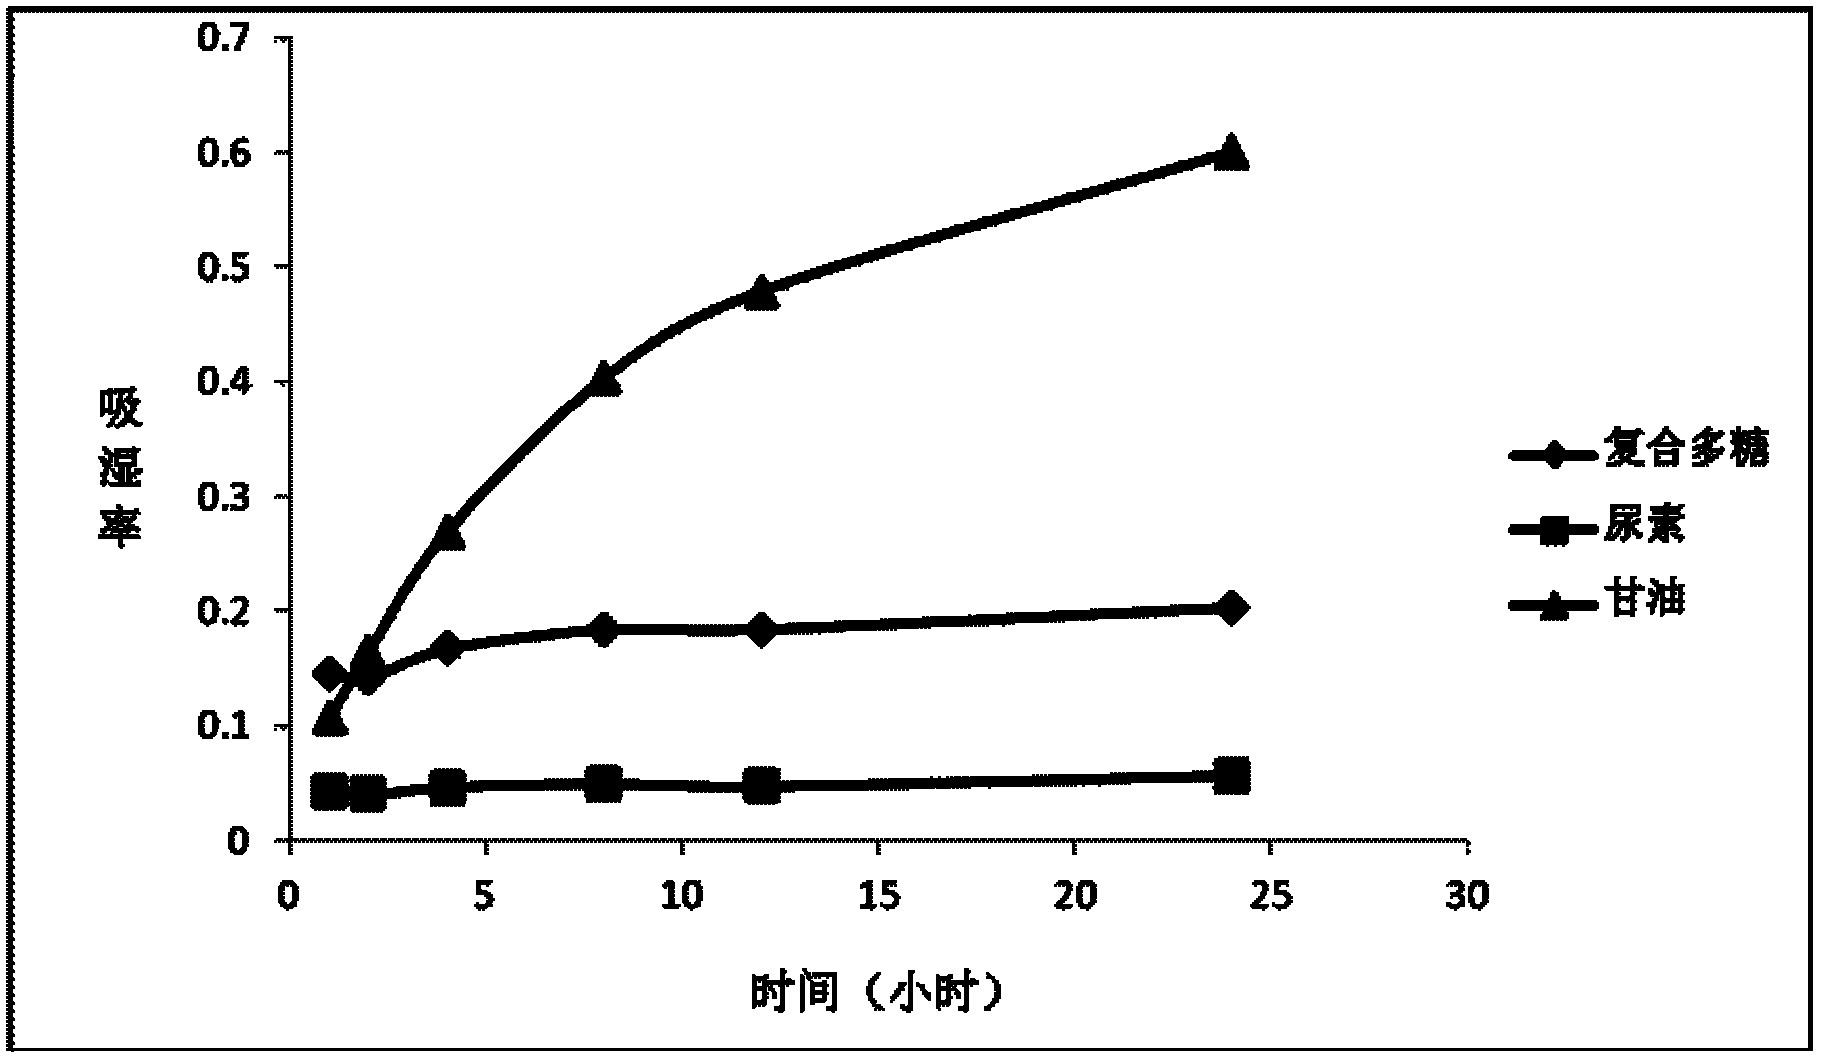 Moisturizing skin-care formulation containing complex polysaccharides and preparation method thereof